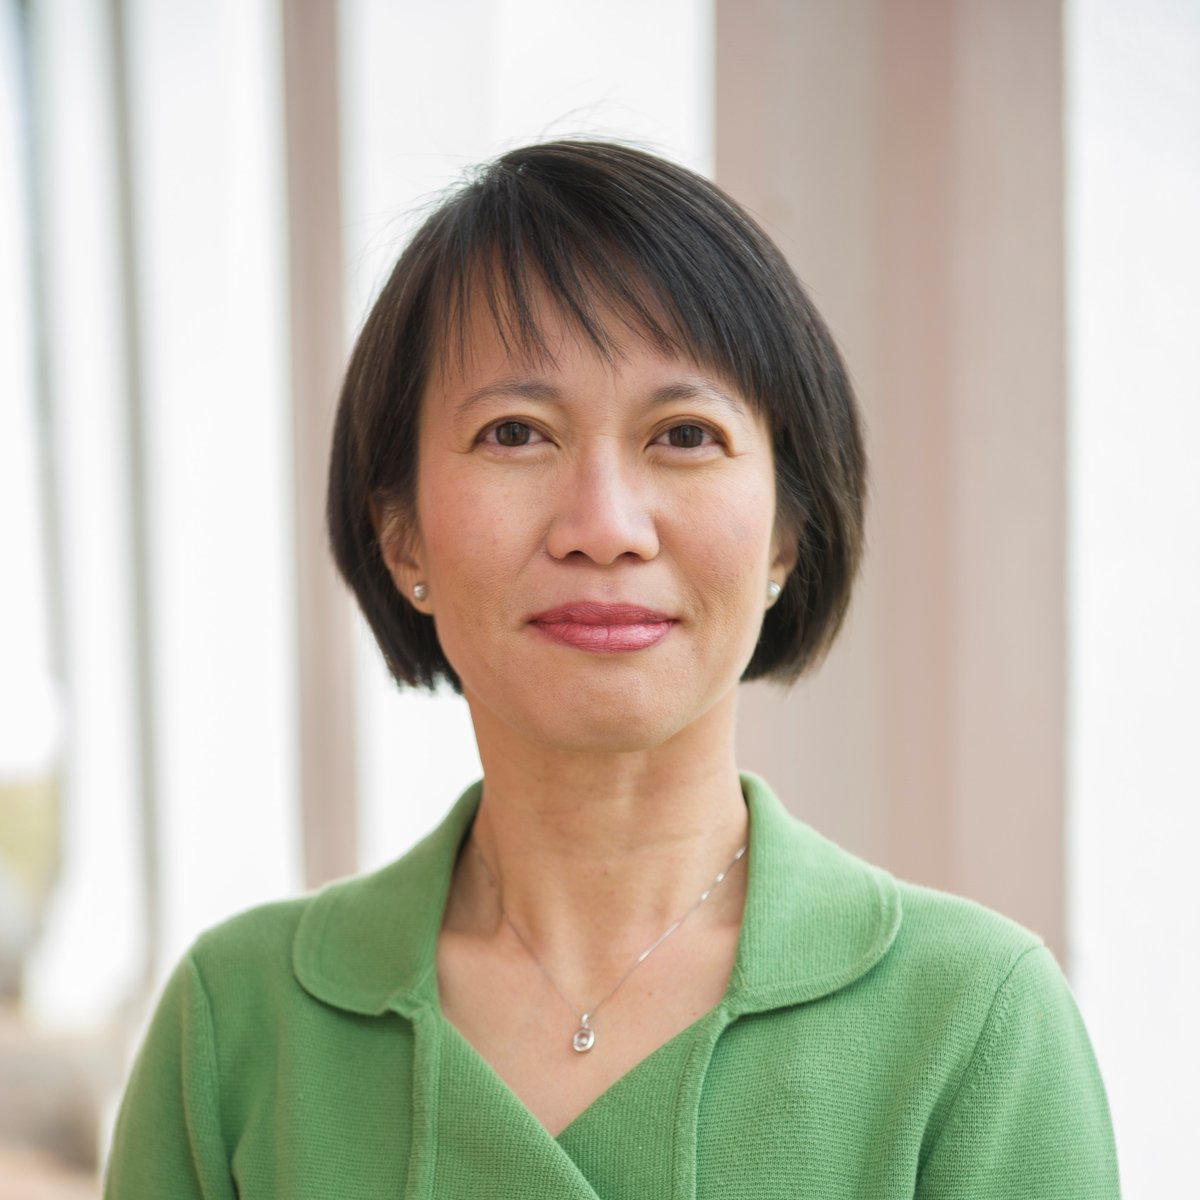 CPH Fellow Dr. LaiYee Leong pioneered this project, interviewing 15 key people whose experience & expertise could help us--and most importantly, future generations--understand the U.S.-Norwegian alliance during this critical time. /3  https://www.smu.edu/Dedman/Research/Institutes-and-Centers/Center-for-Presidential-History/People/People/Fellows/Leong